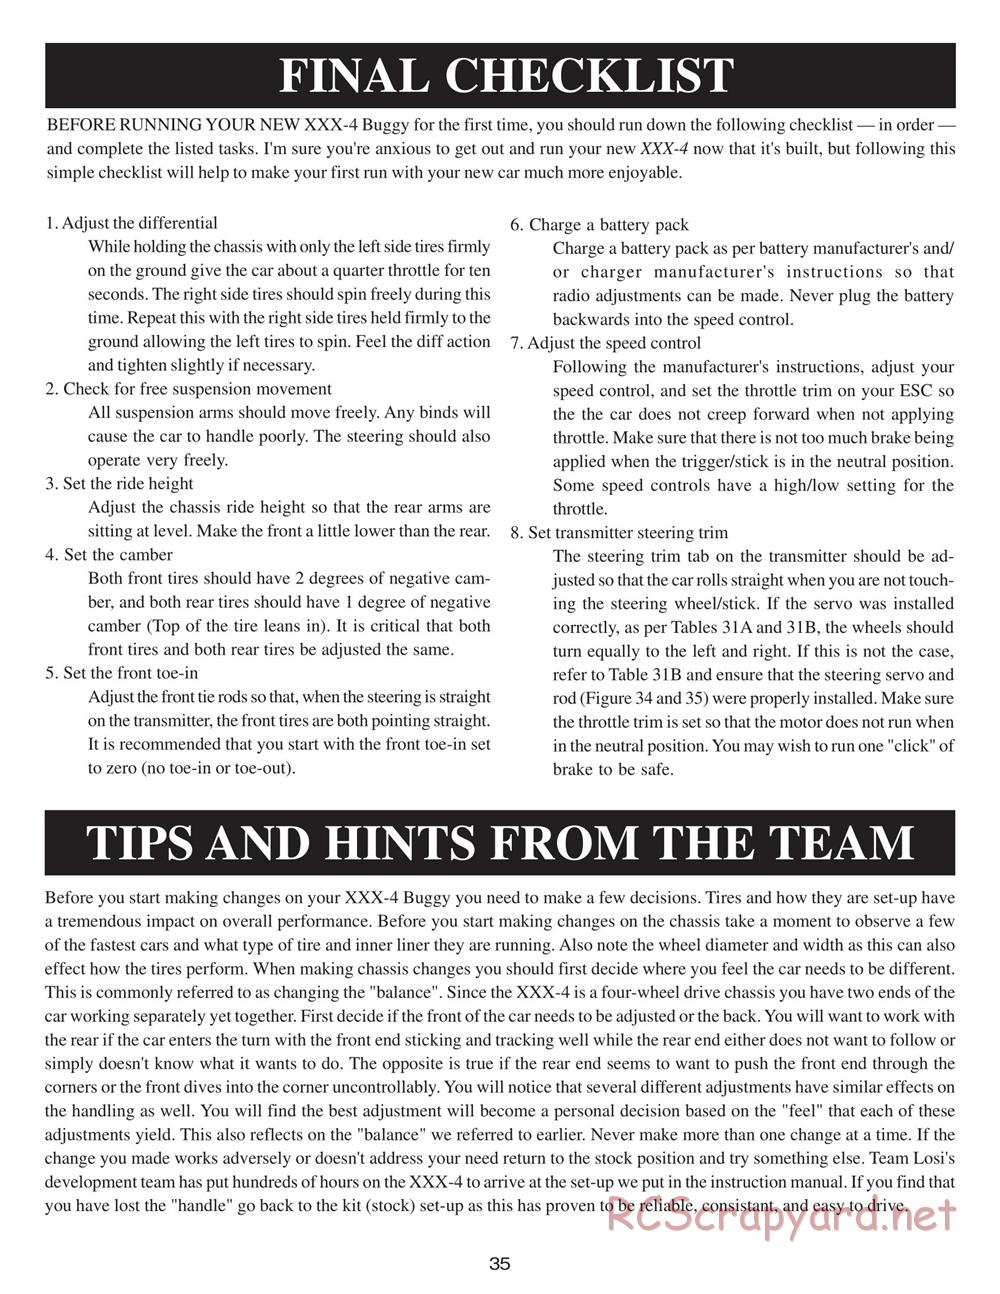 Team Losi - XXX4 - Manual - Page 38